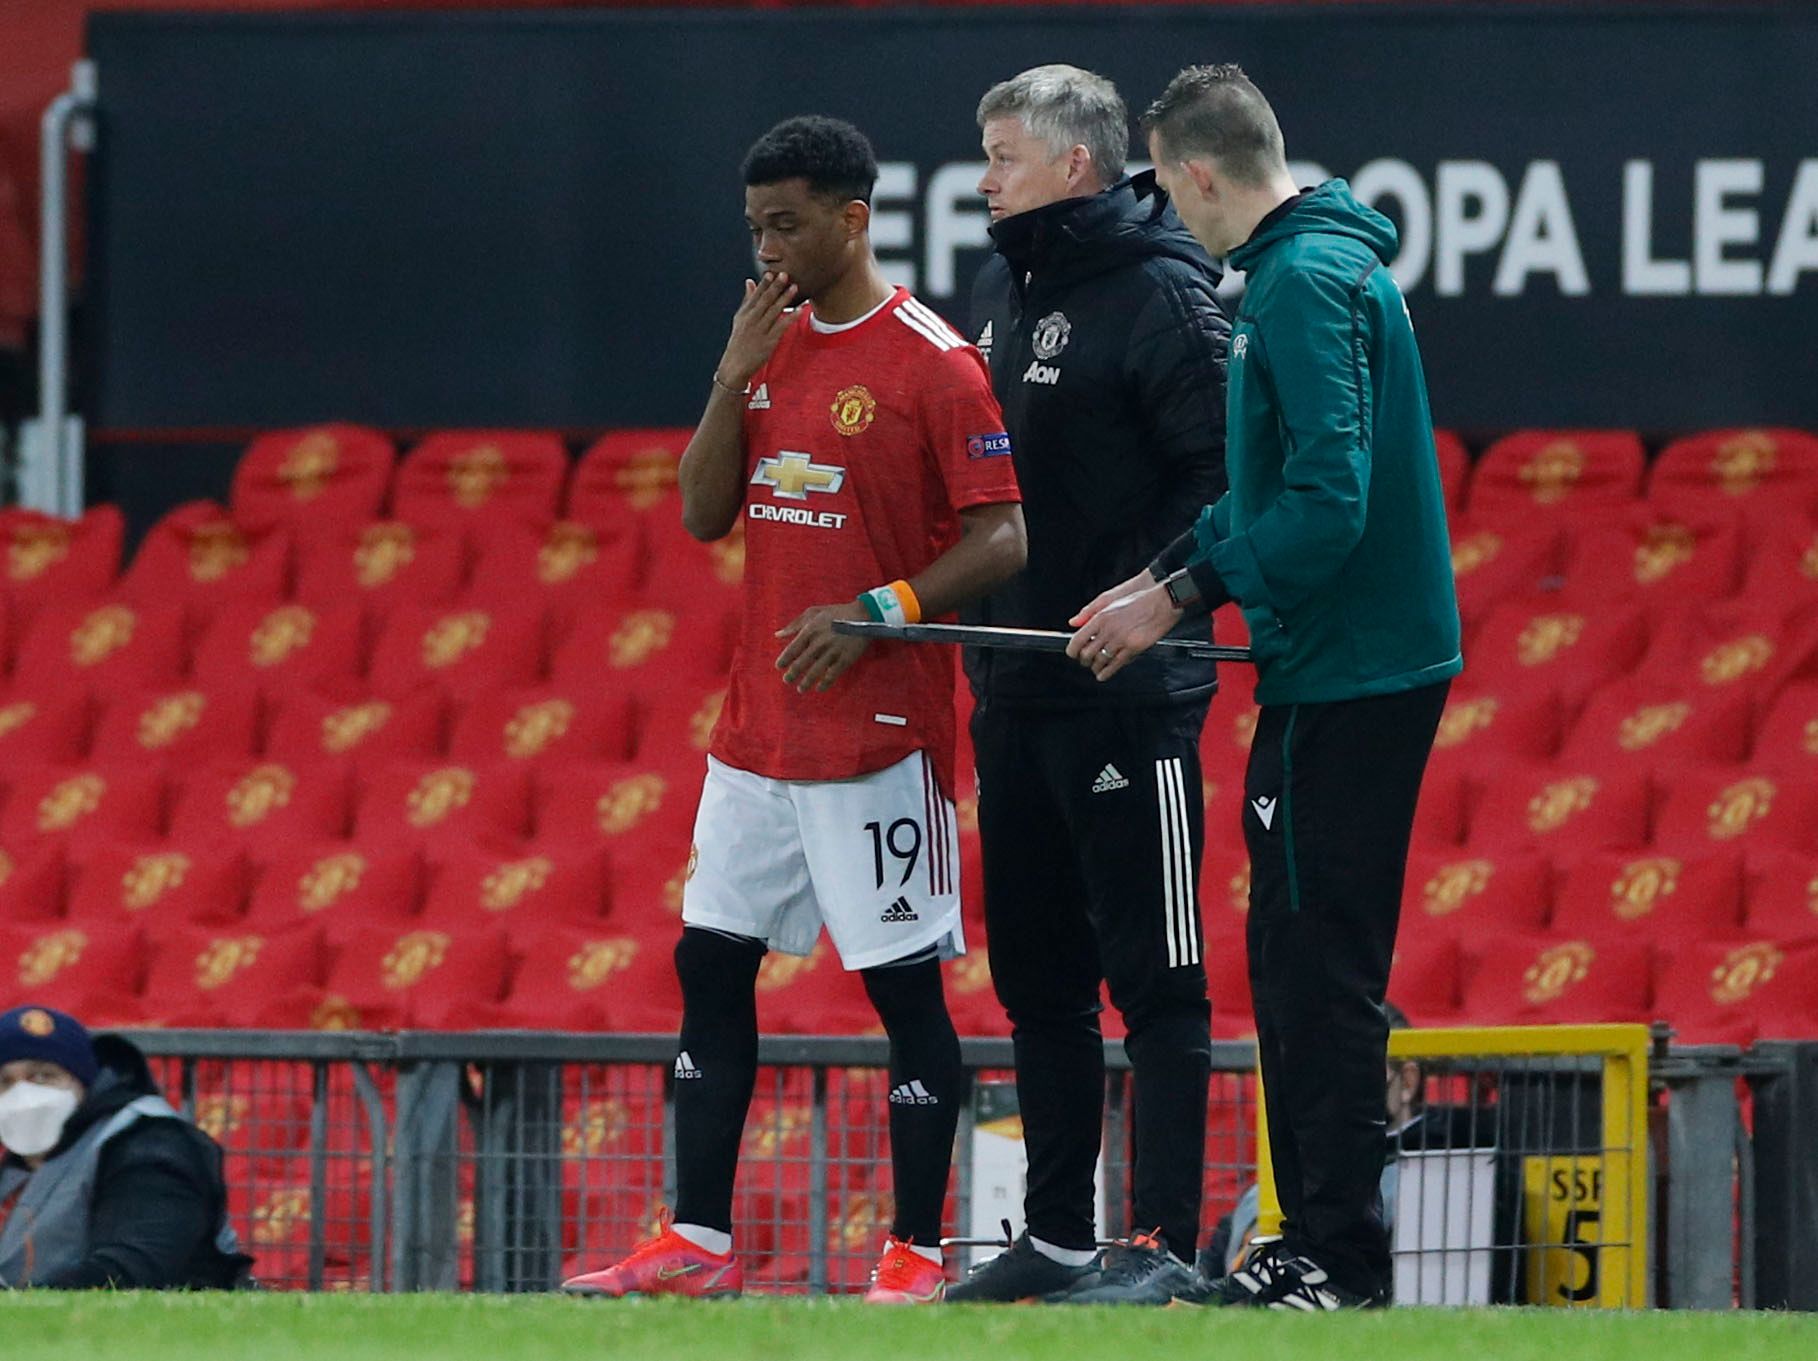 Soccer Football - Europa League - Round of 32 Second Leg - Manchester United v Real Sociedad - Old Trafford, Manchester, Britain - February 25, 2021 Manchester United manager Ole Gunnar Solskjaer prepares to substitute on Manchester United's Amad Diallo REUTERS/Phil Noble